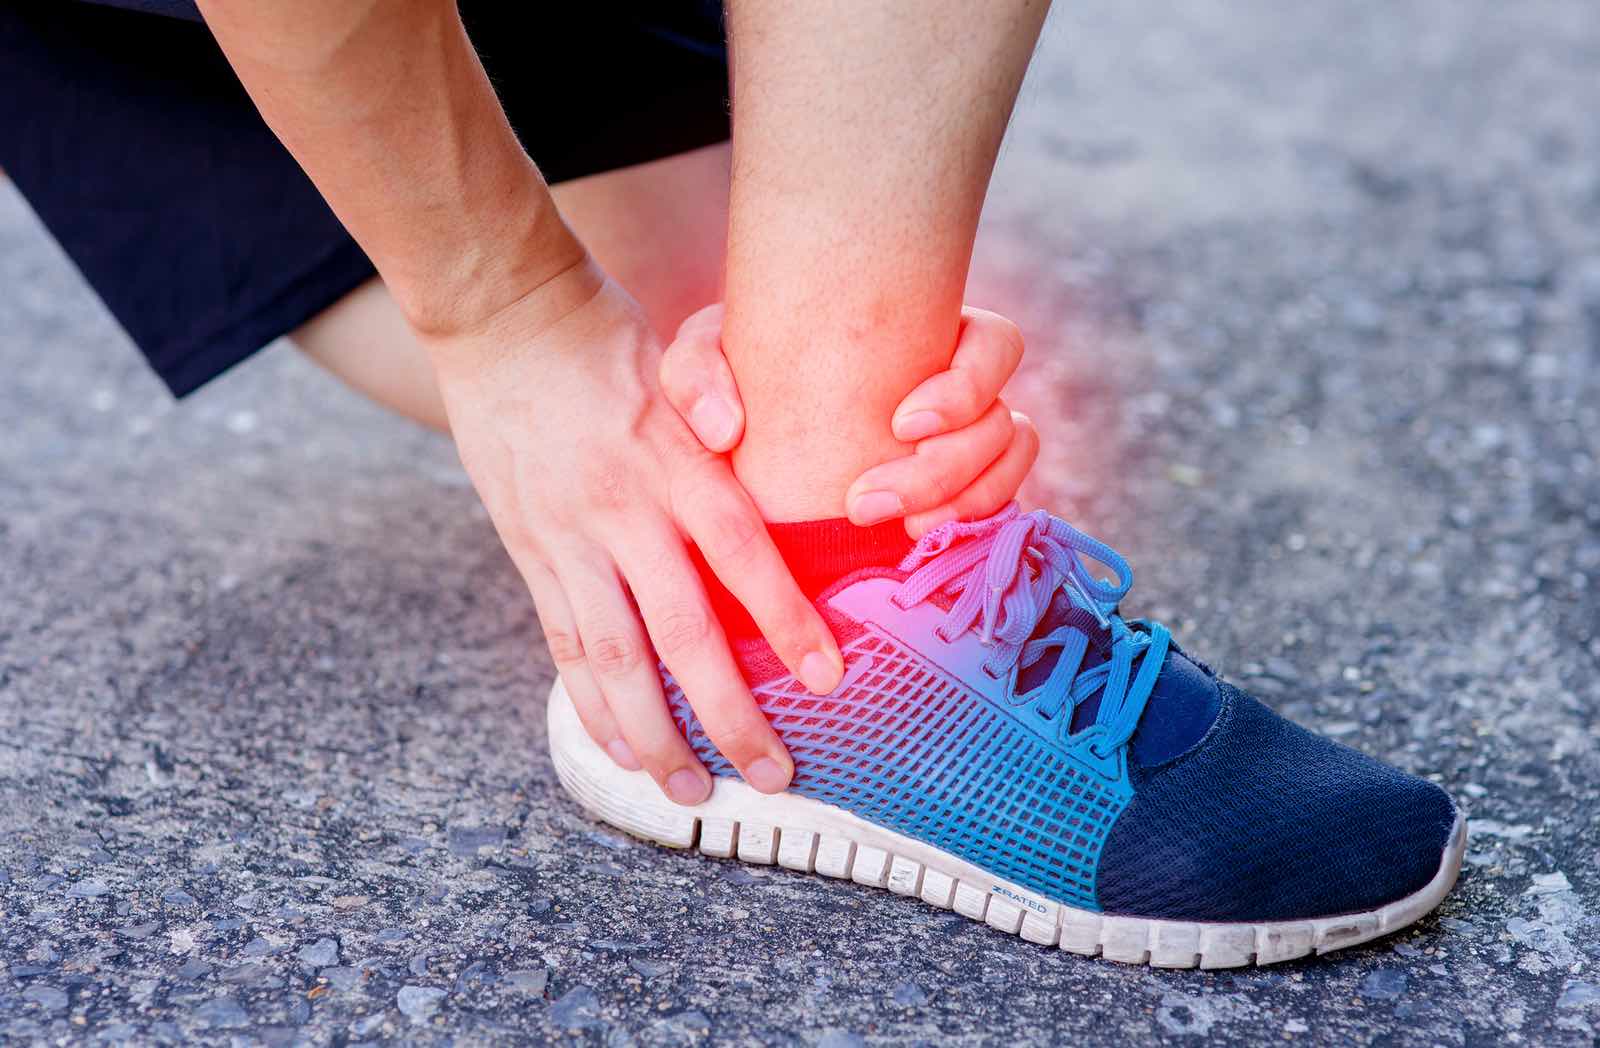 Ankle sprain is an injury we can provide help with at Ian Griffiths Clinics